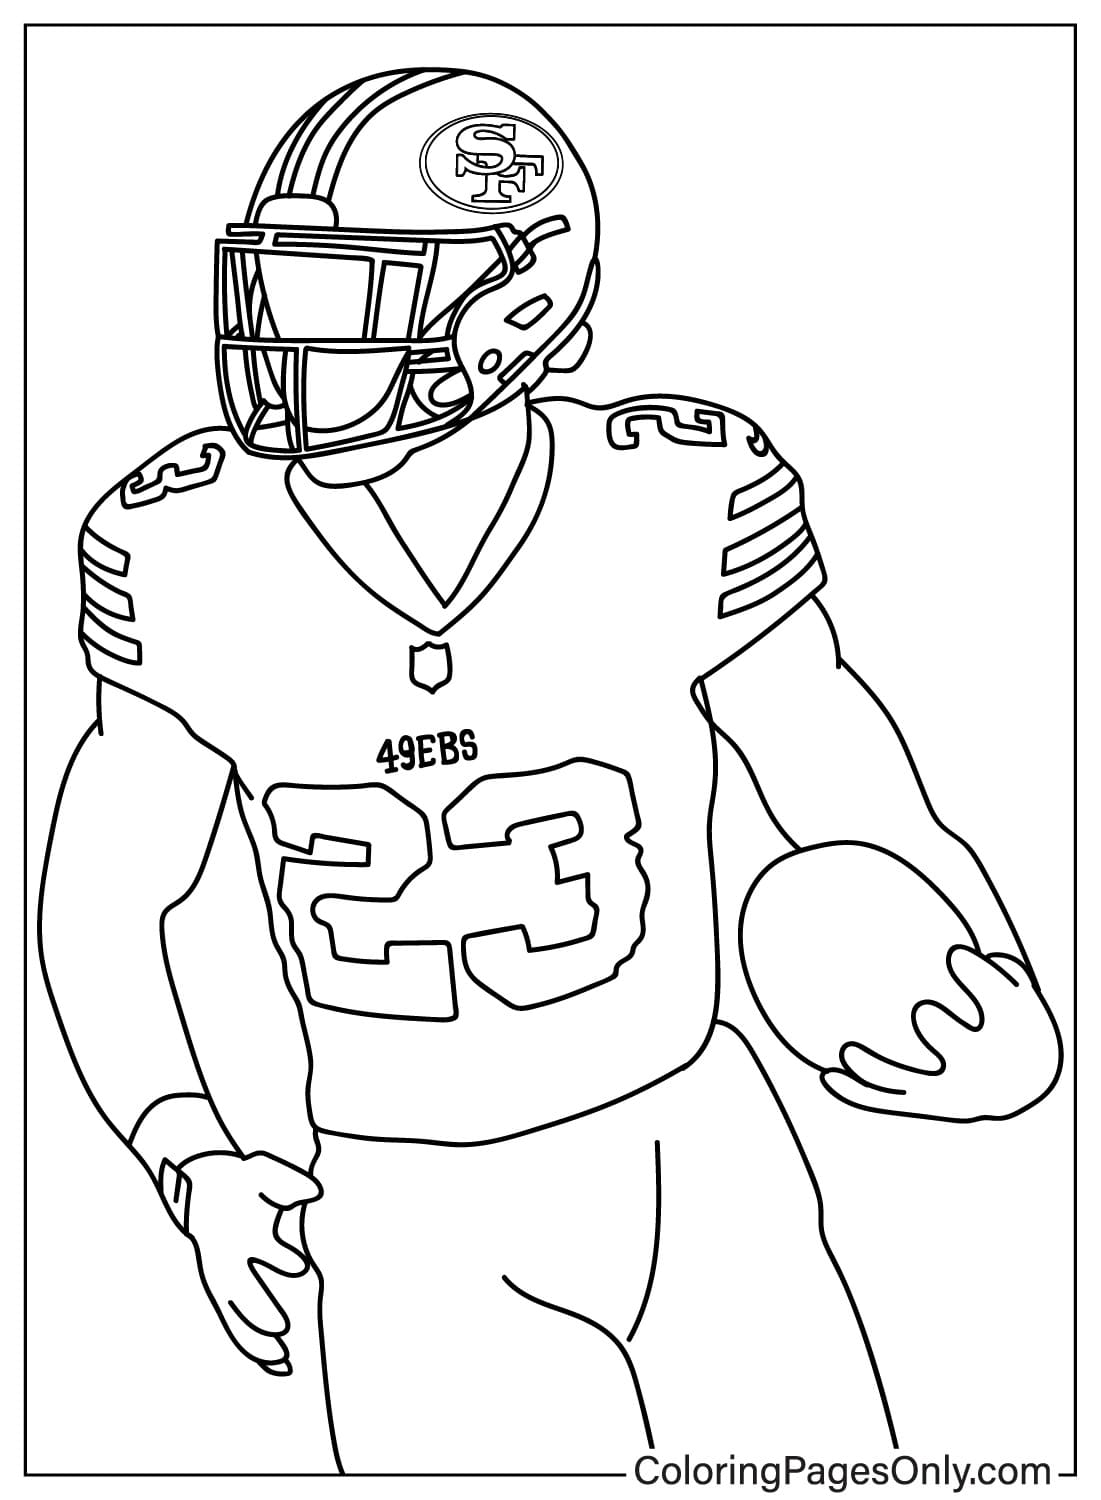 Christian McCaffrey Coloring Page Images from San Francisco 49ers